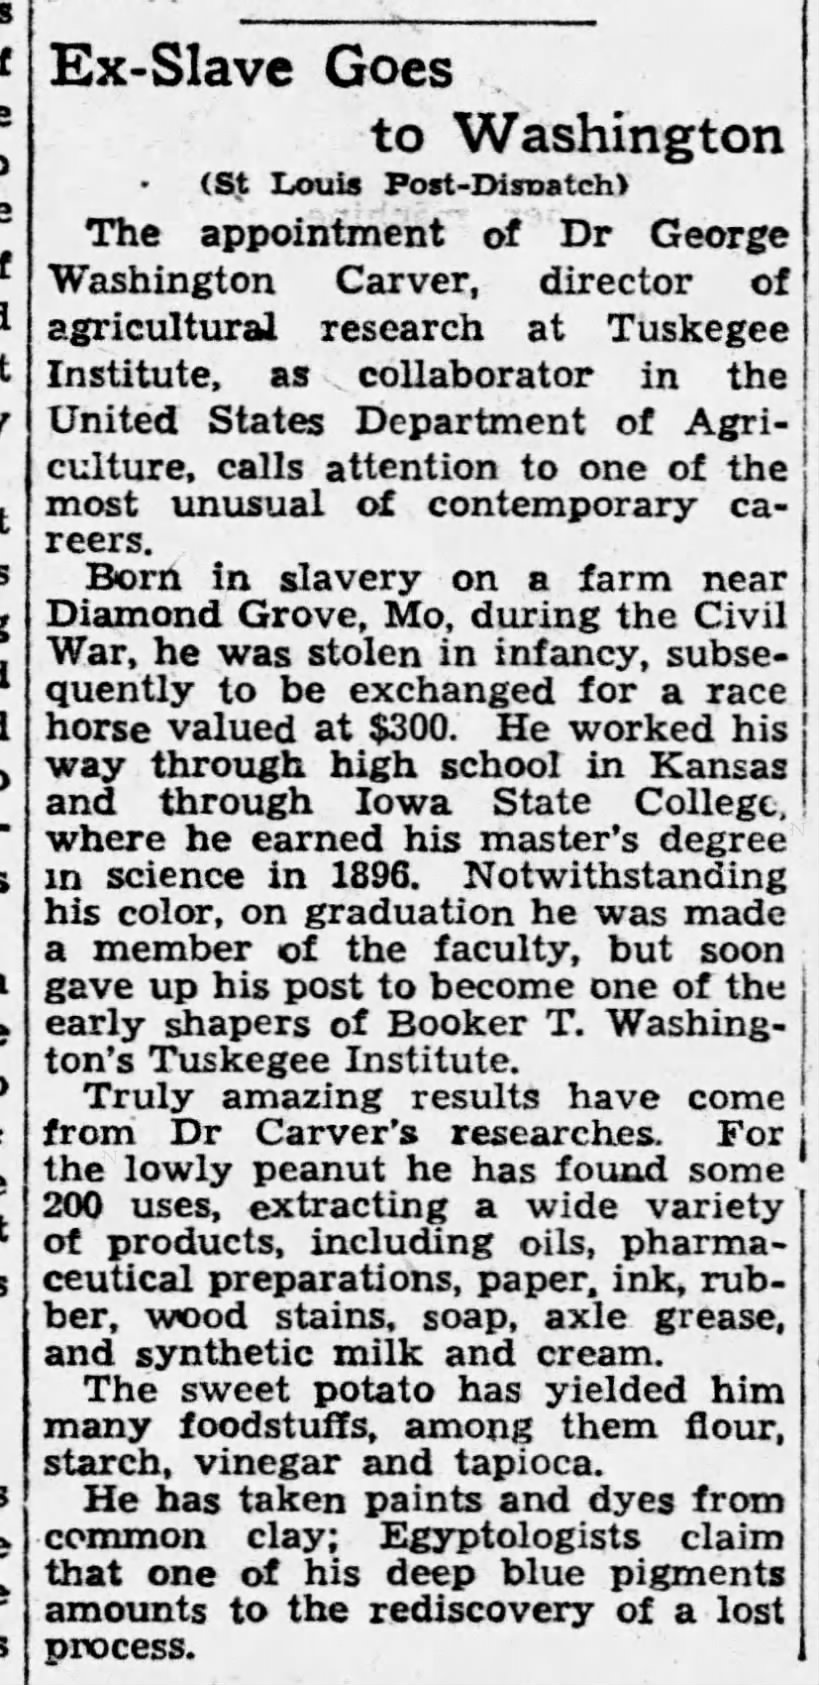 George Washington Carver is appointed as collaborator in the US Department of Agriculture, 1935